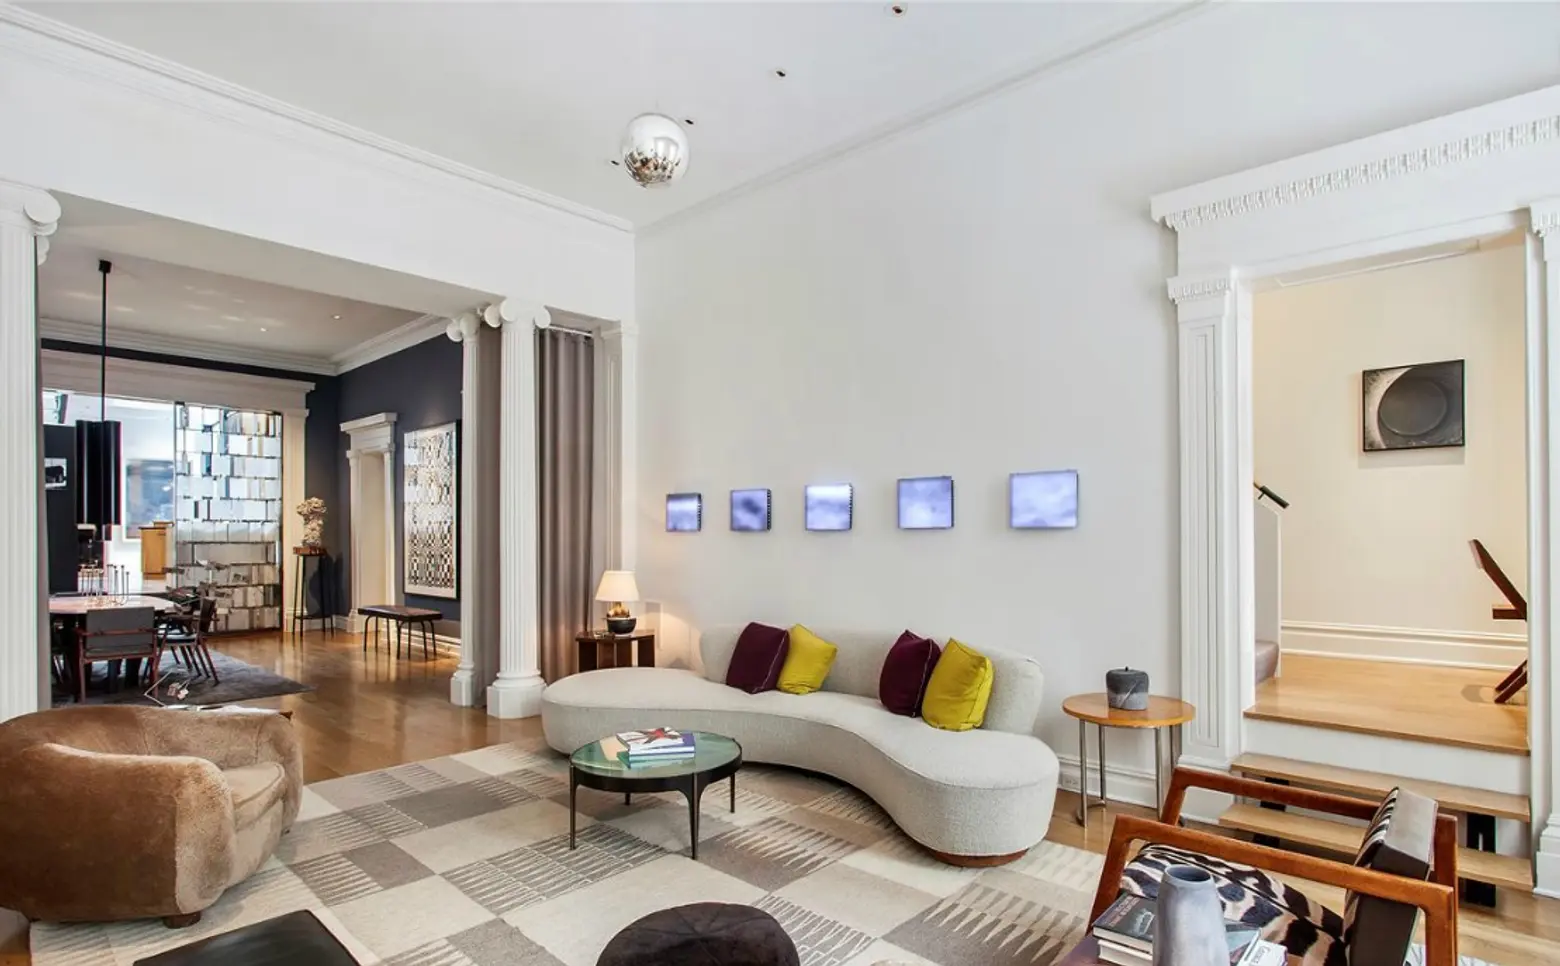 Lovely $11M Greenwich Village Pad Has Two Terraces and Two Master Suites